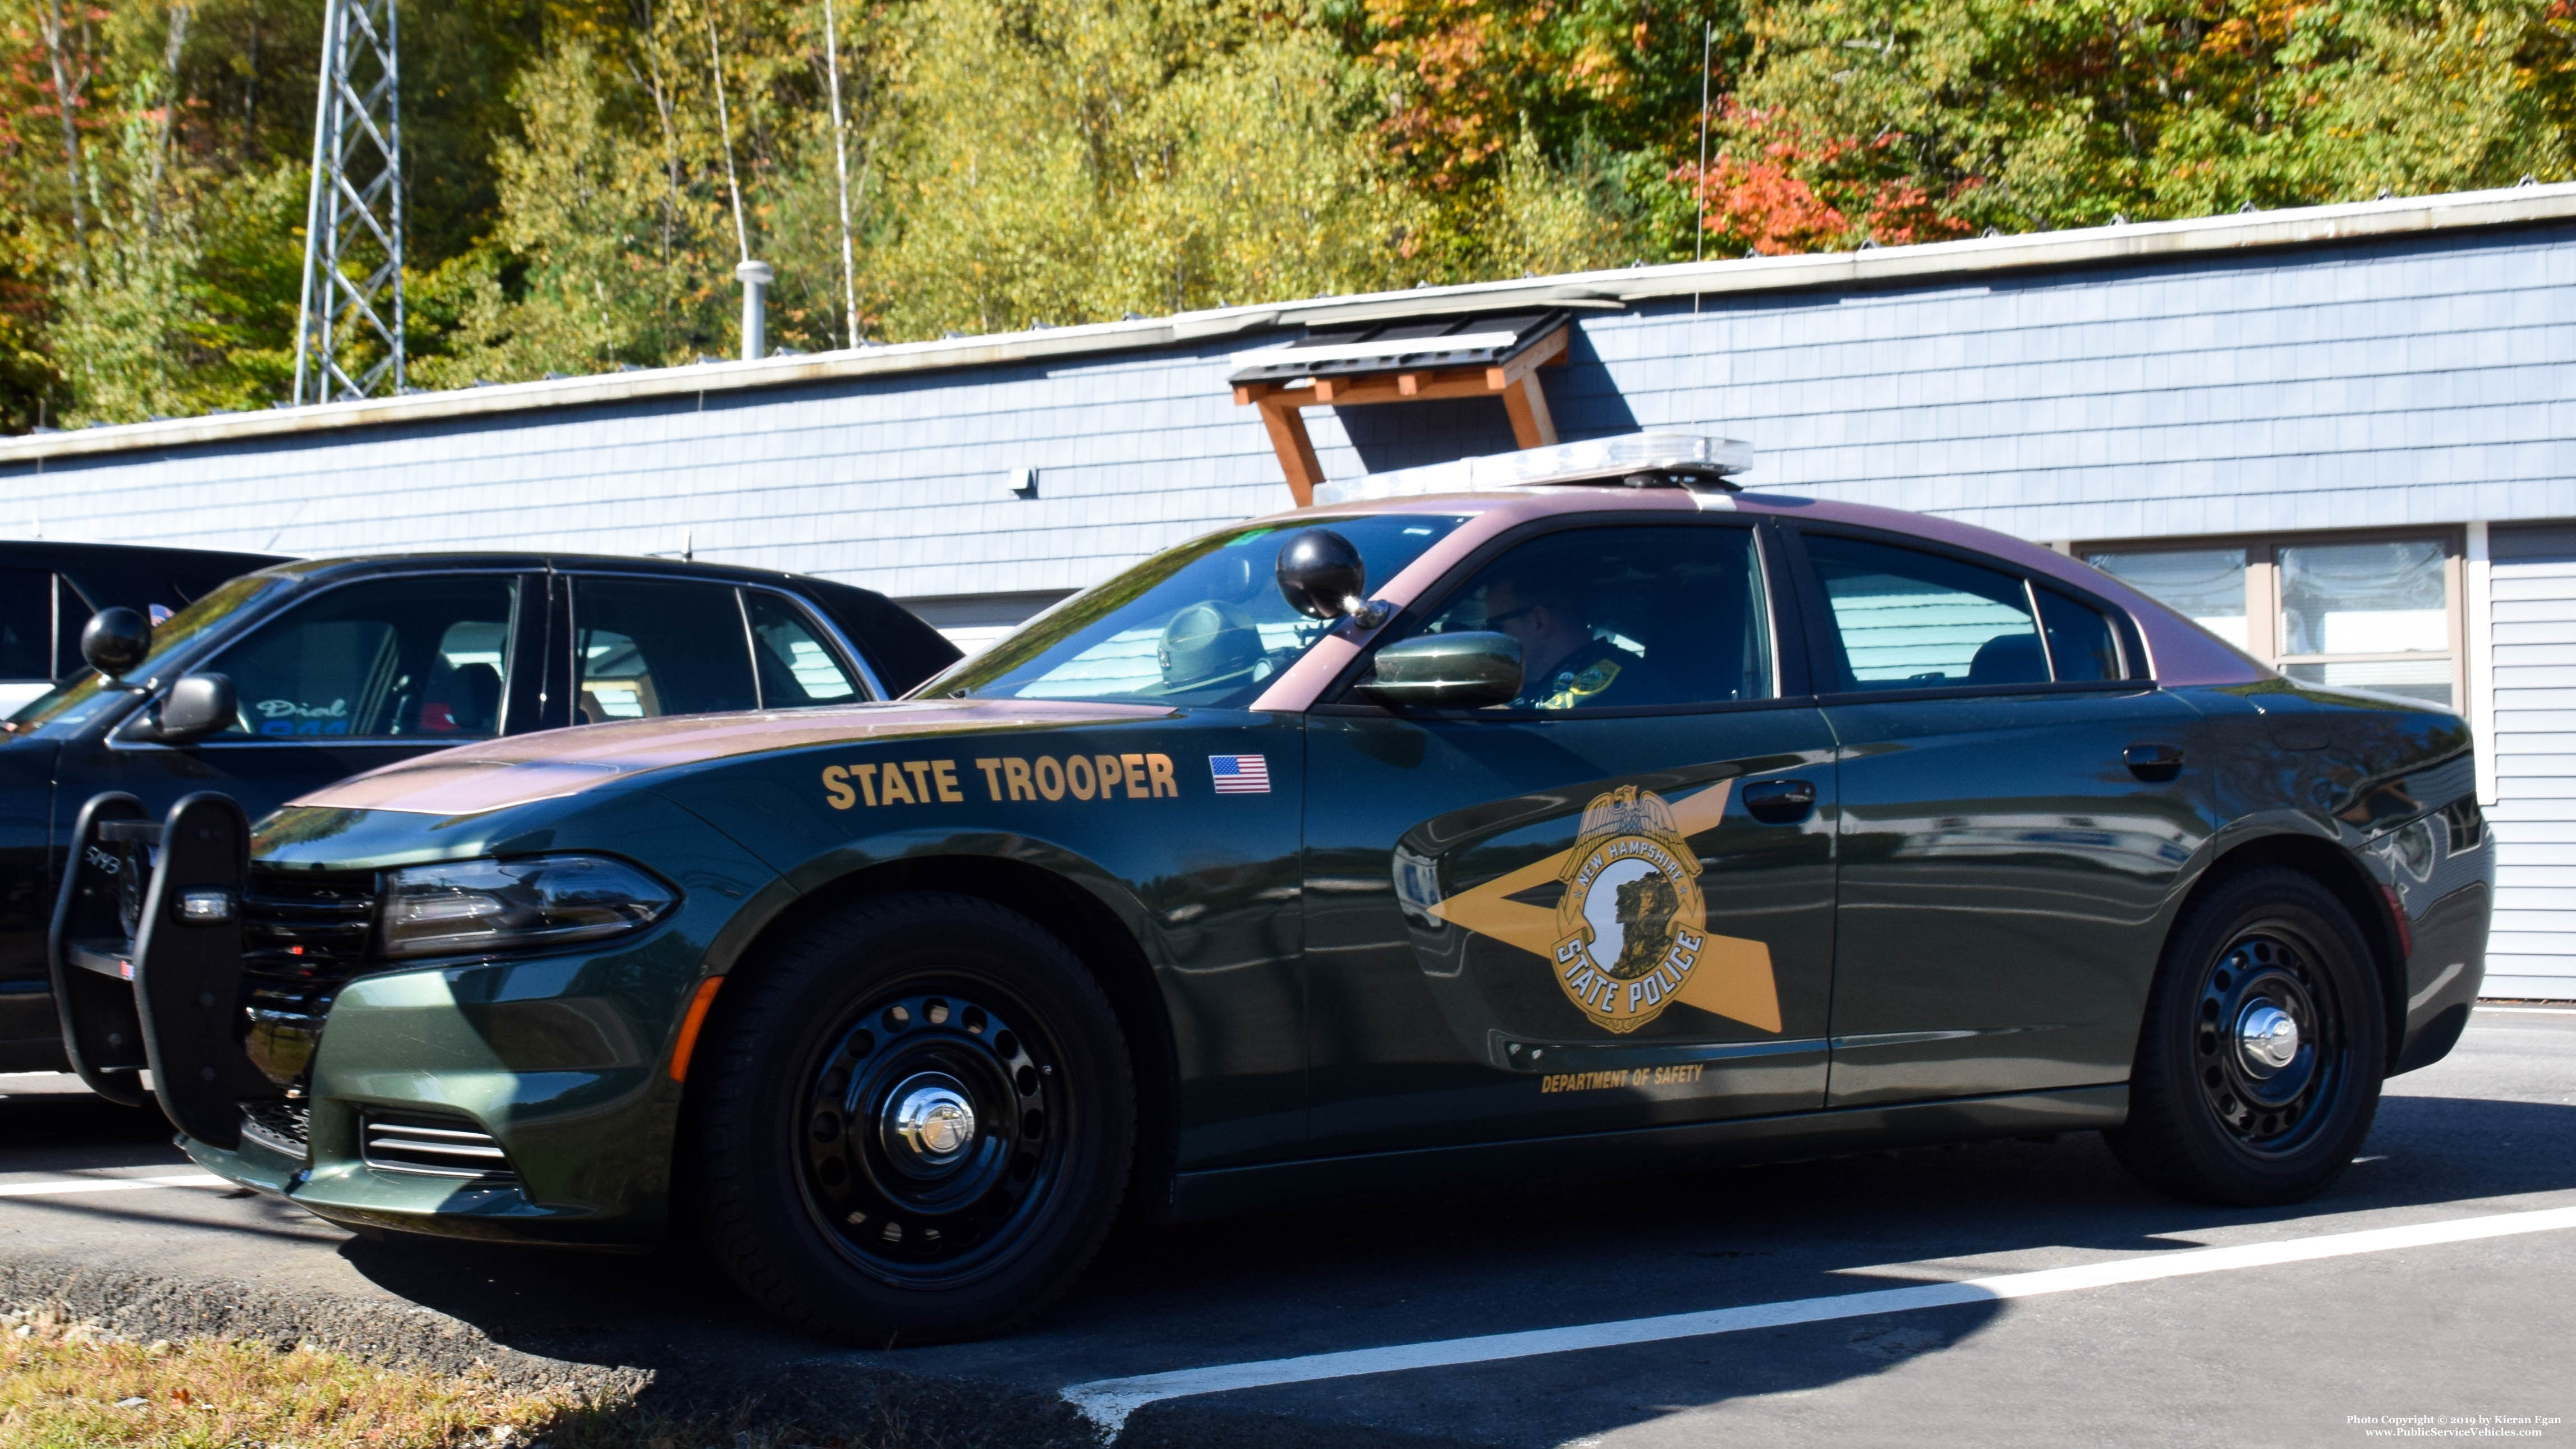 A photo  of New Hampshire State Police
            Cruiser 607, a 2015-2016 Dodge Charger             taken by Kieran Egan